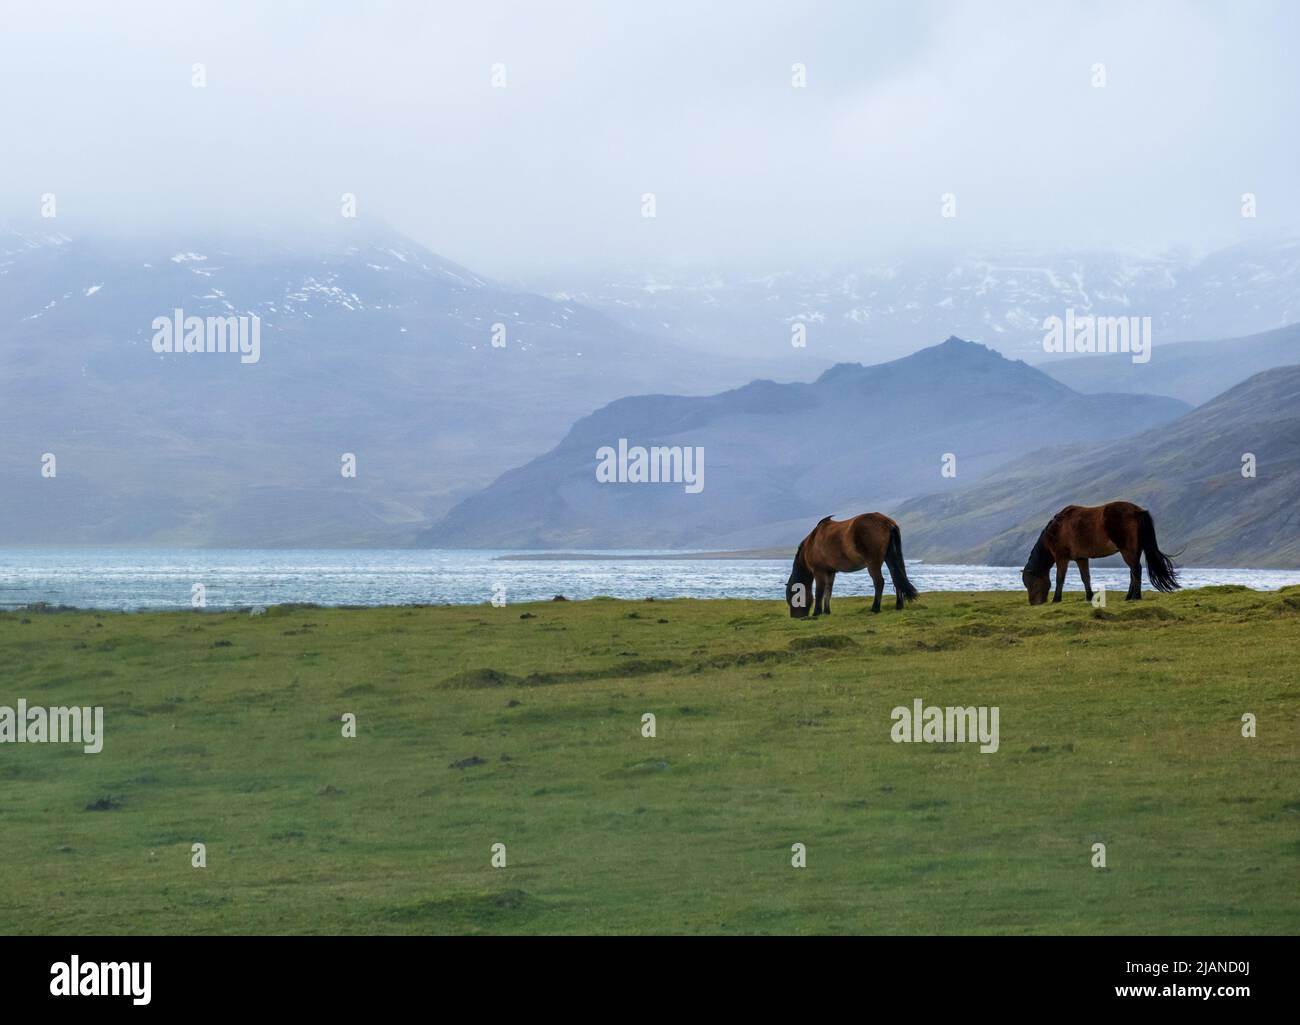 Pair of Icelandic horses graze on West Iceland highlands, Snaefellsnes peninsula. Spectacular volcanic tundra landscape with mountains, craters, lakes Stock Photo